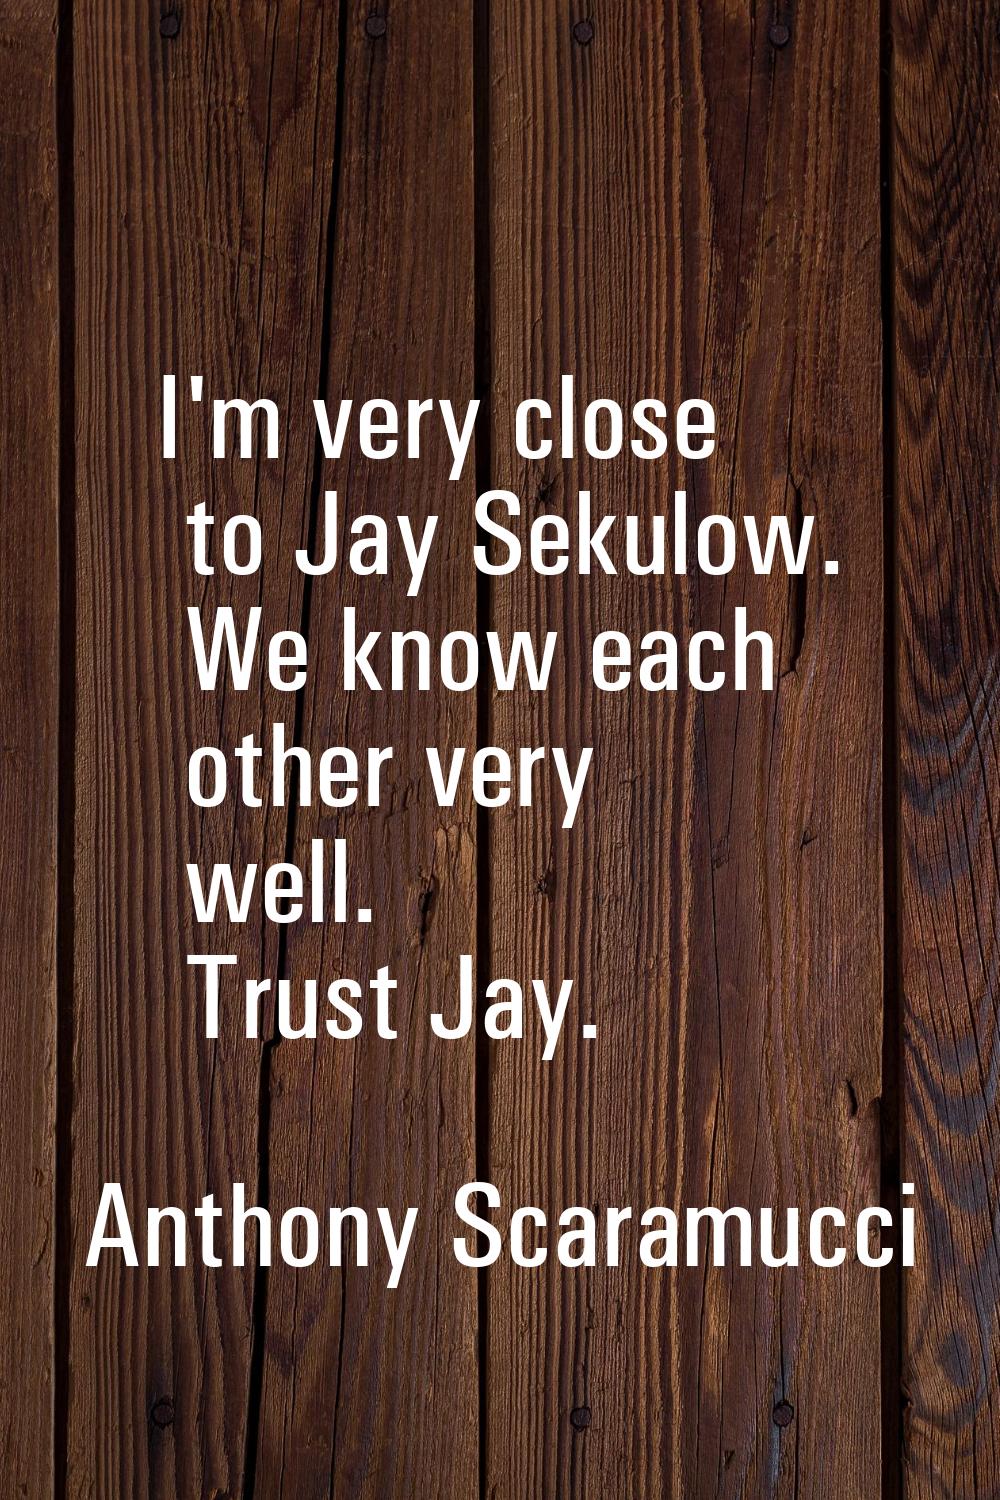 I'm very close to Jay Sekulow. We know each other very well. Trust Jay.